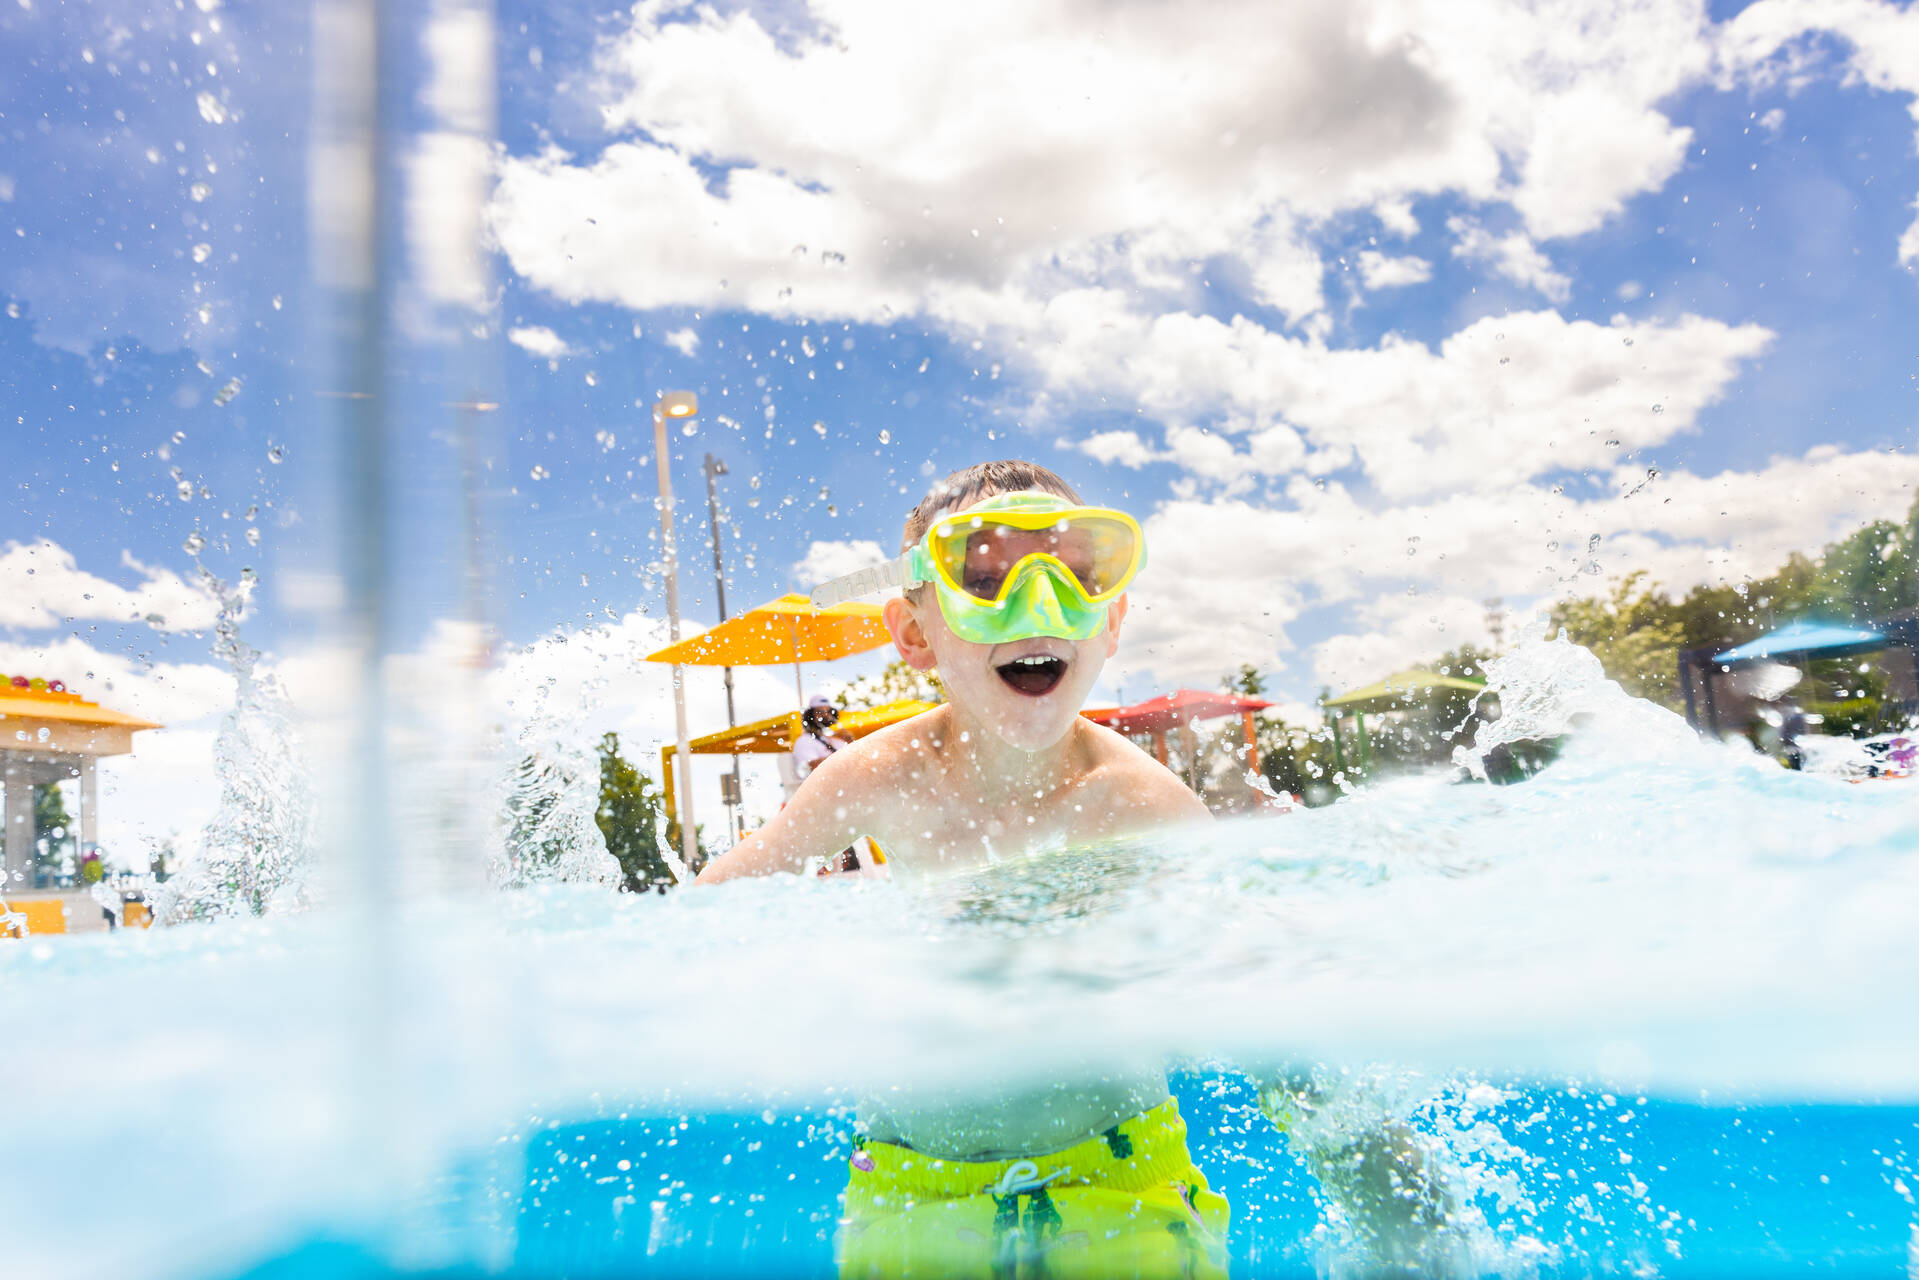 Boy with Goggles Swims in the LEGOLAND Hotel Pool